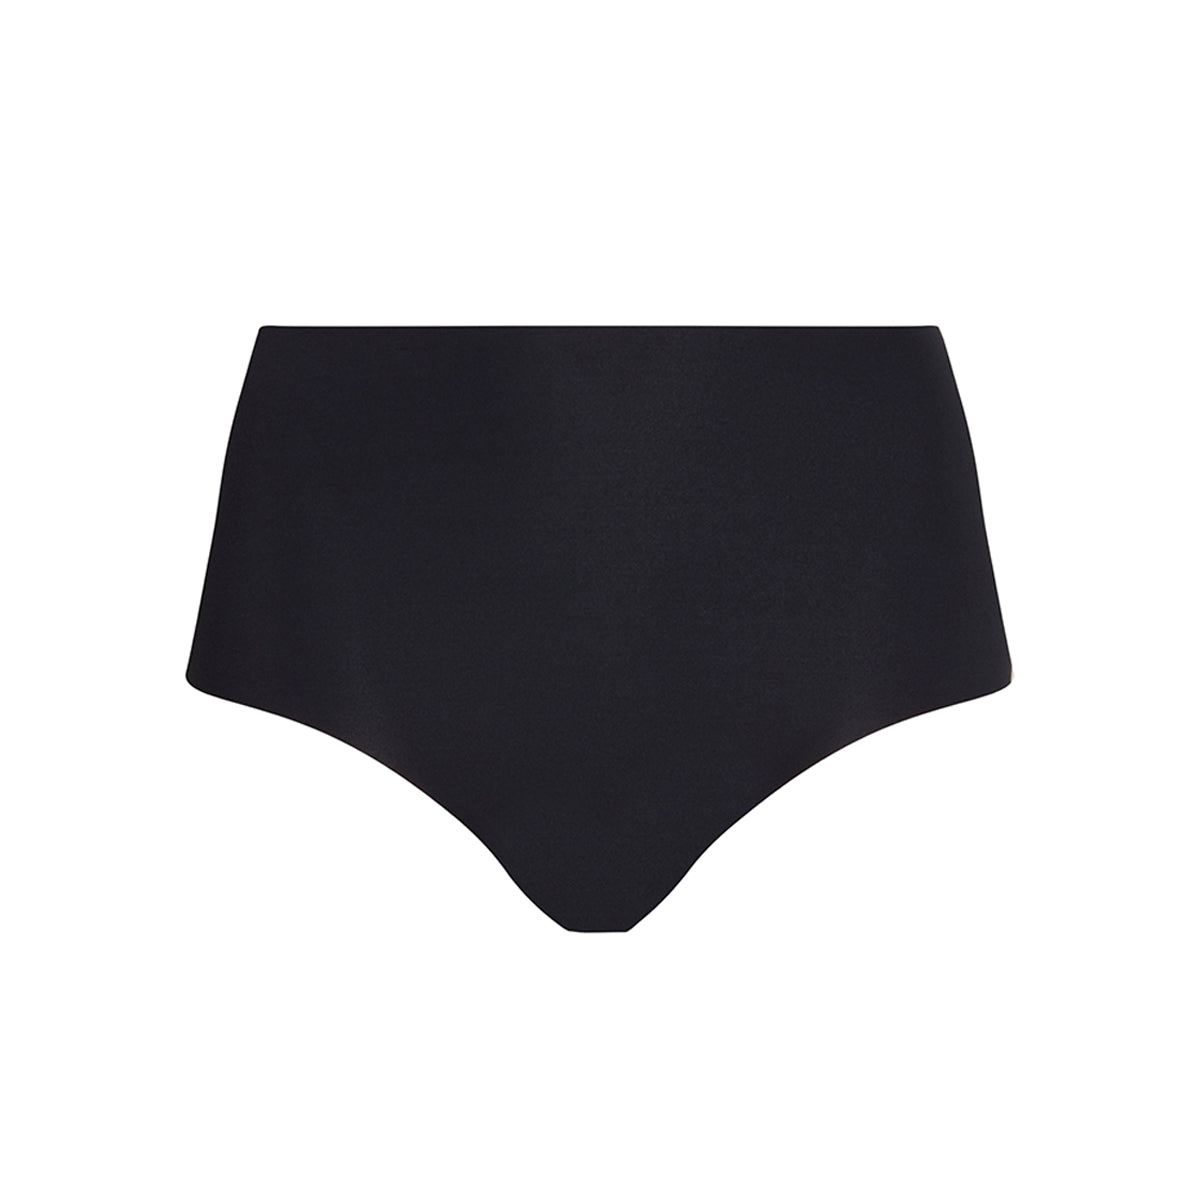 Diam’s Control high rise slimming knickers in black